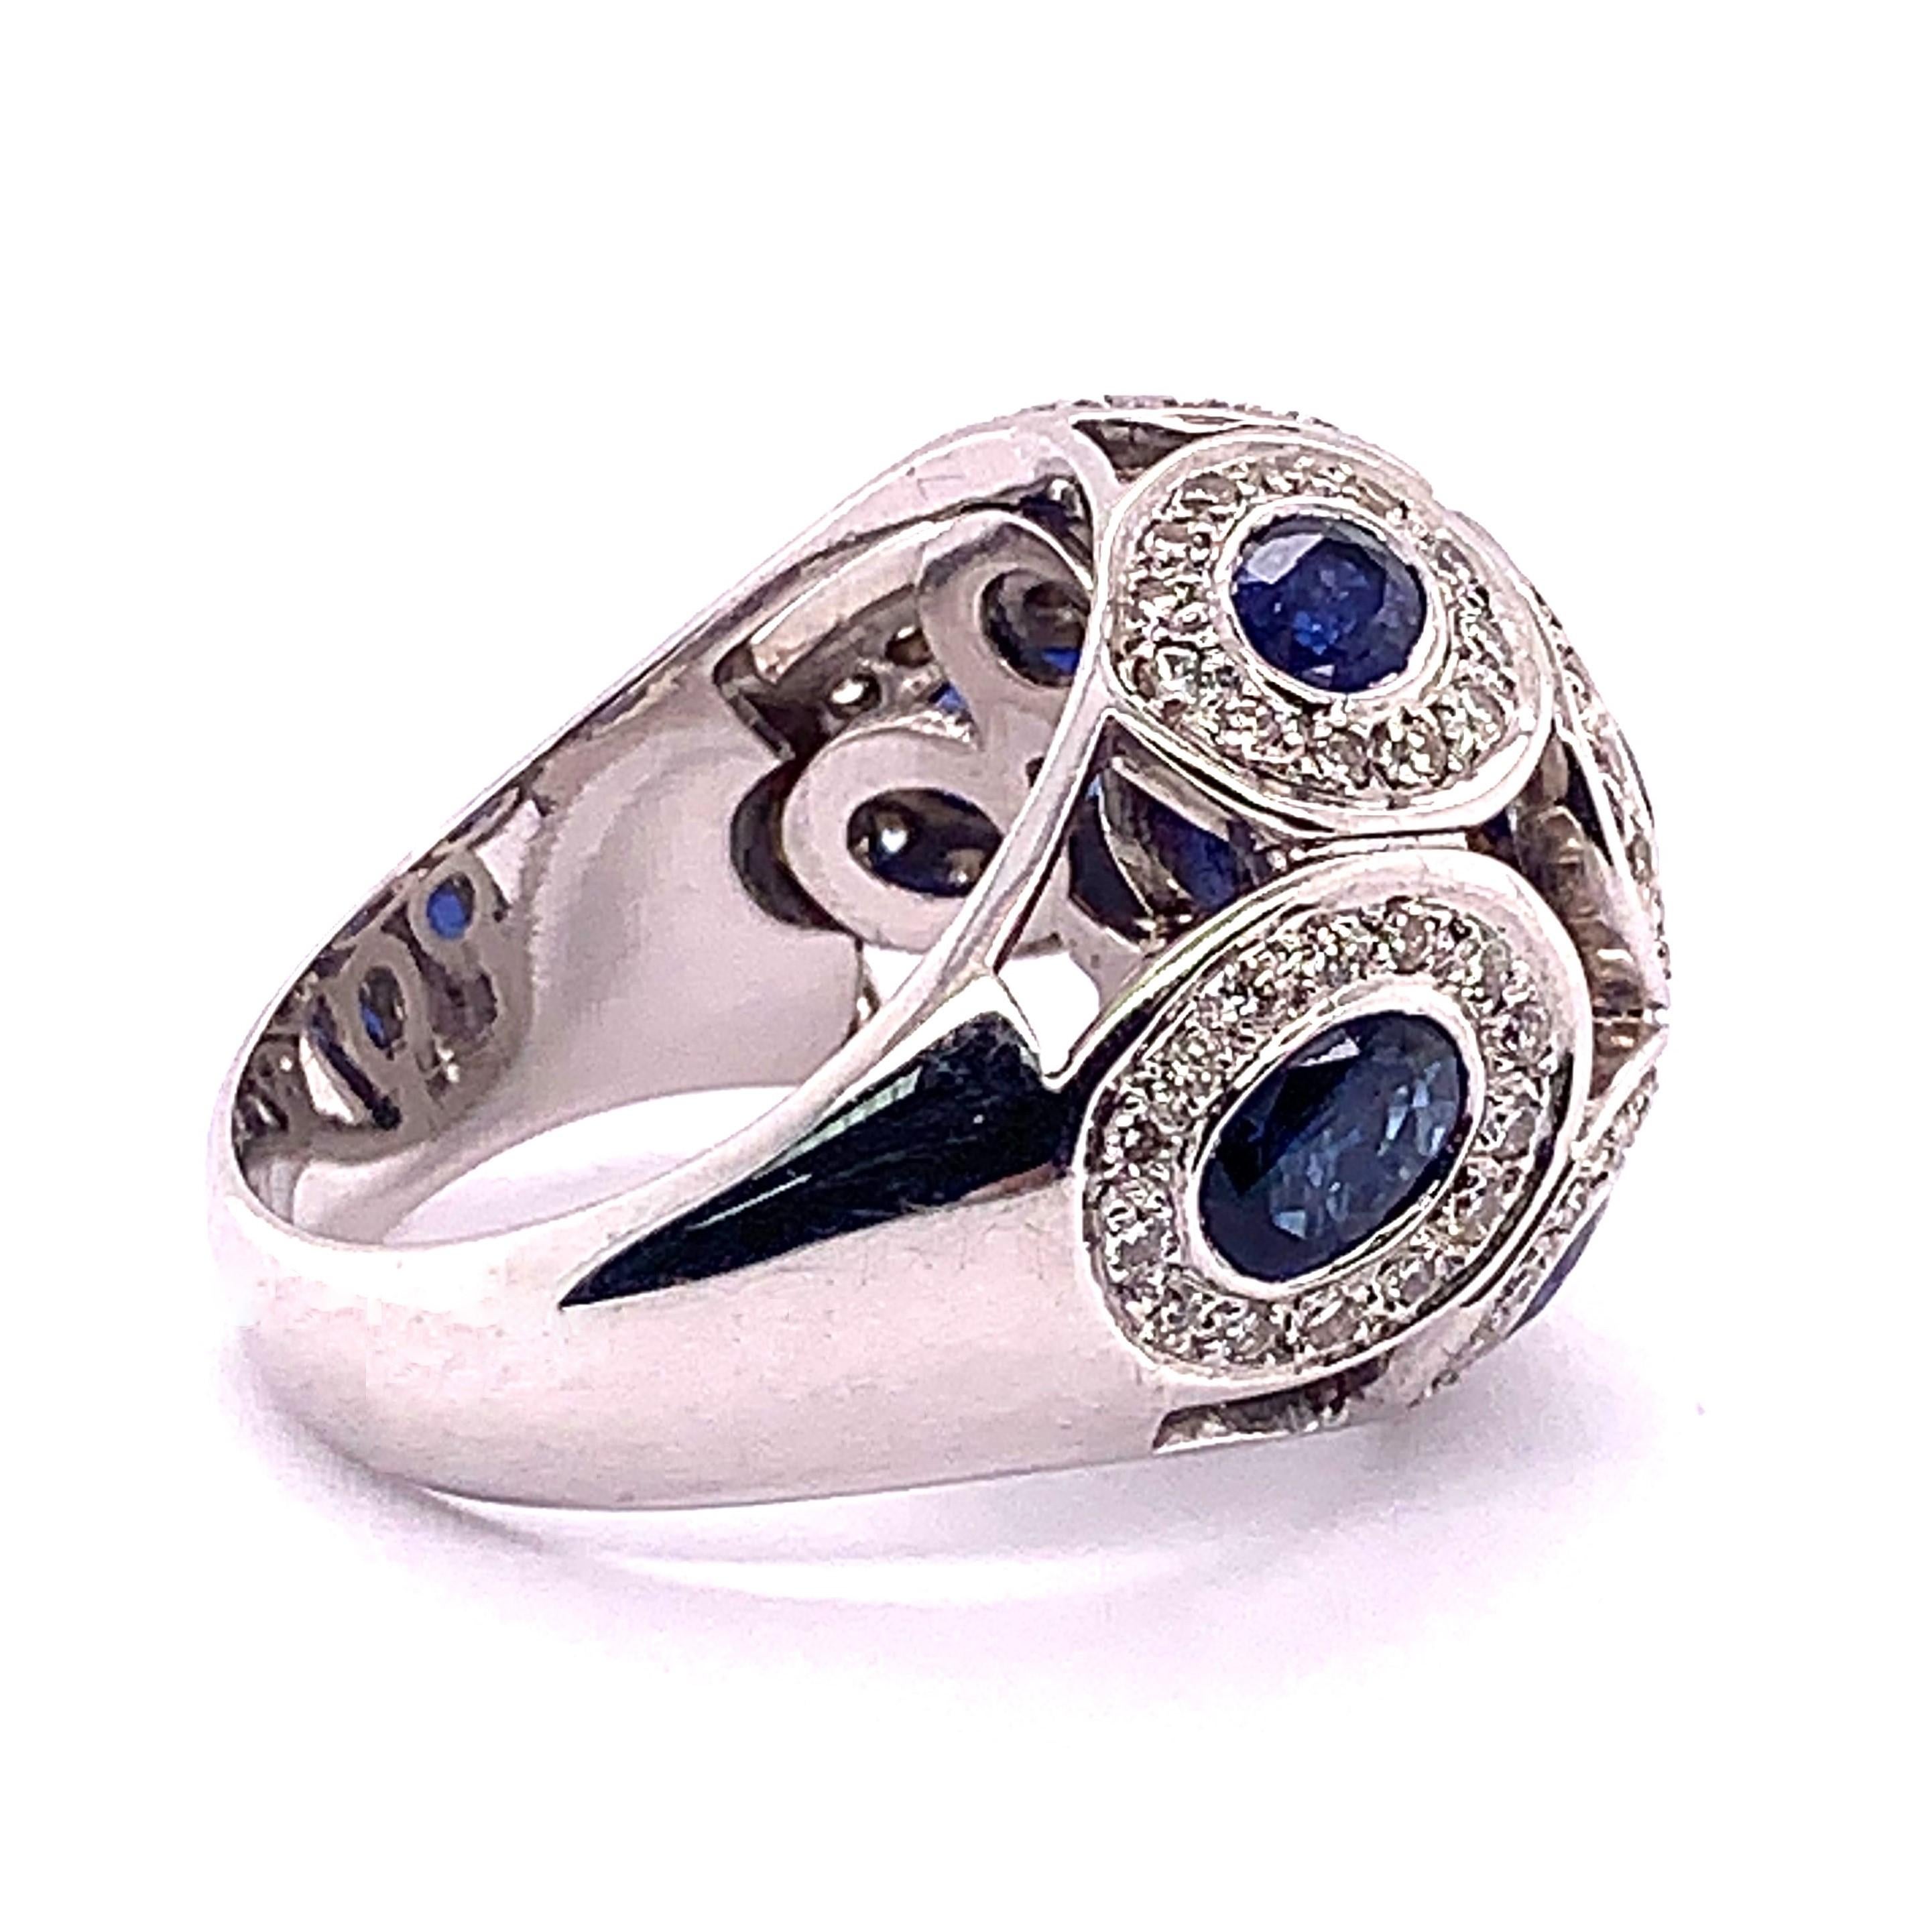 Contemporary 4.63 Carat Blue Oval Sapphire and Diamond Ring